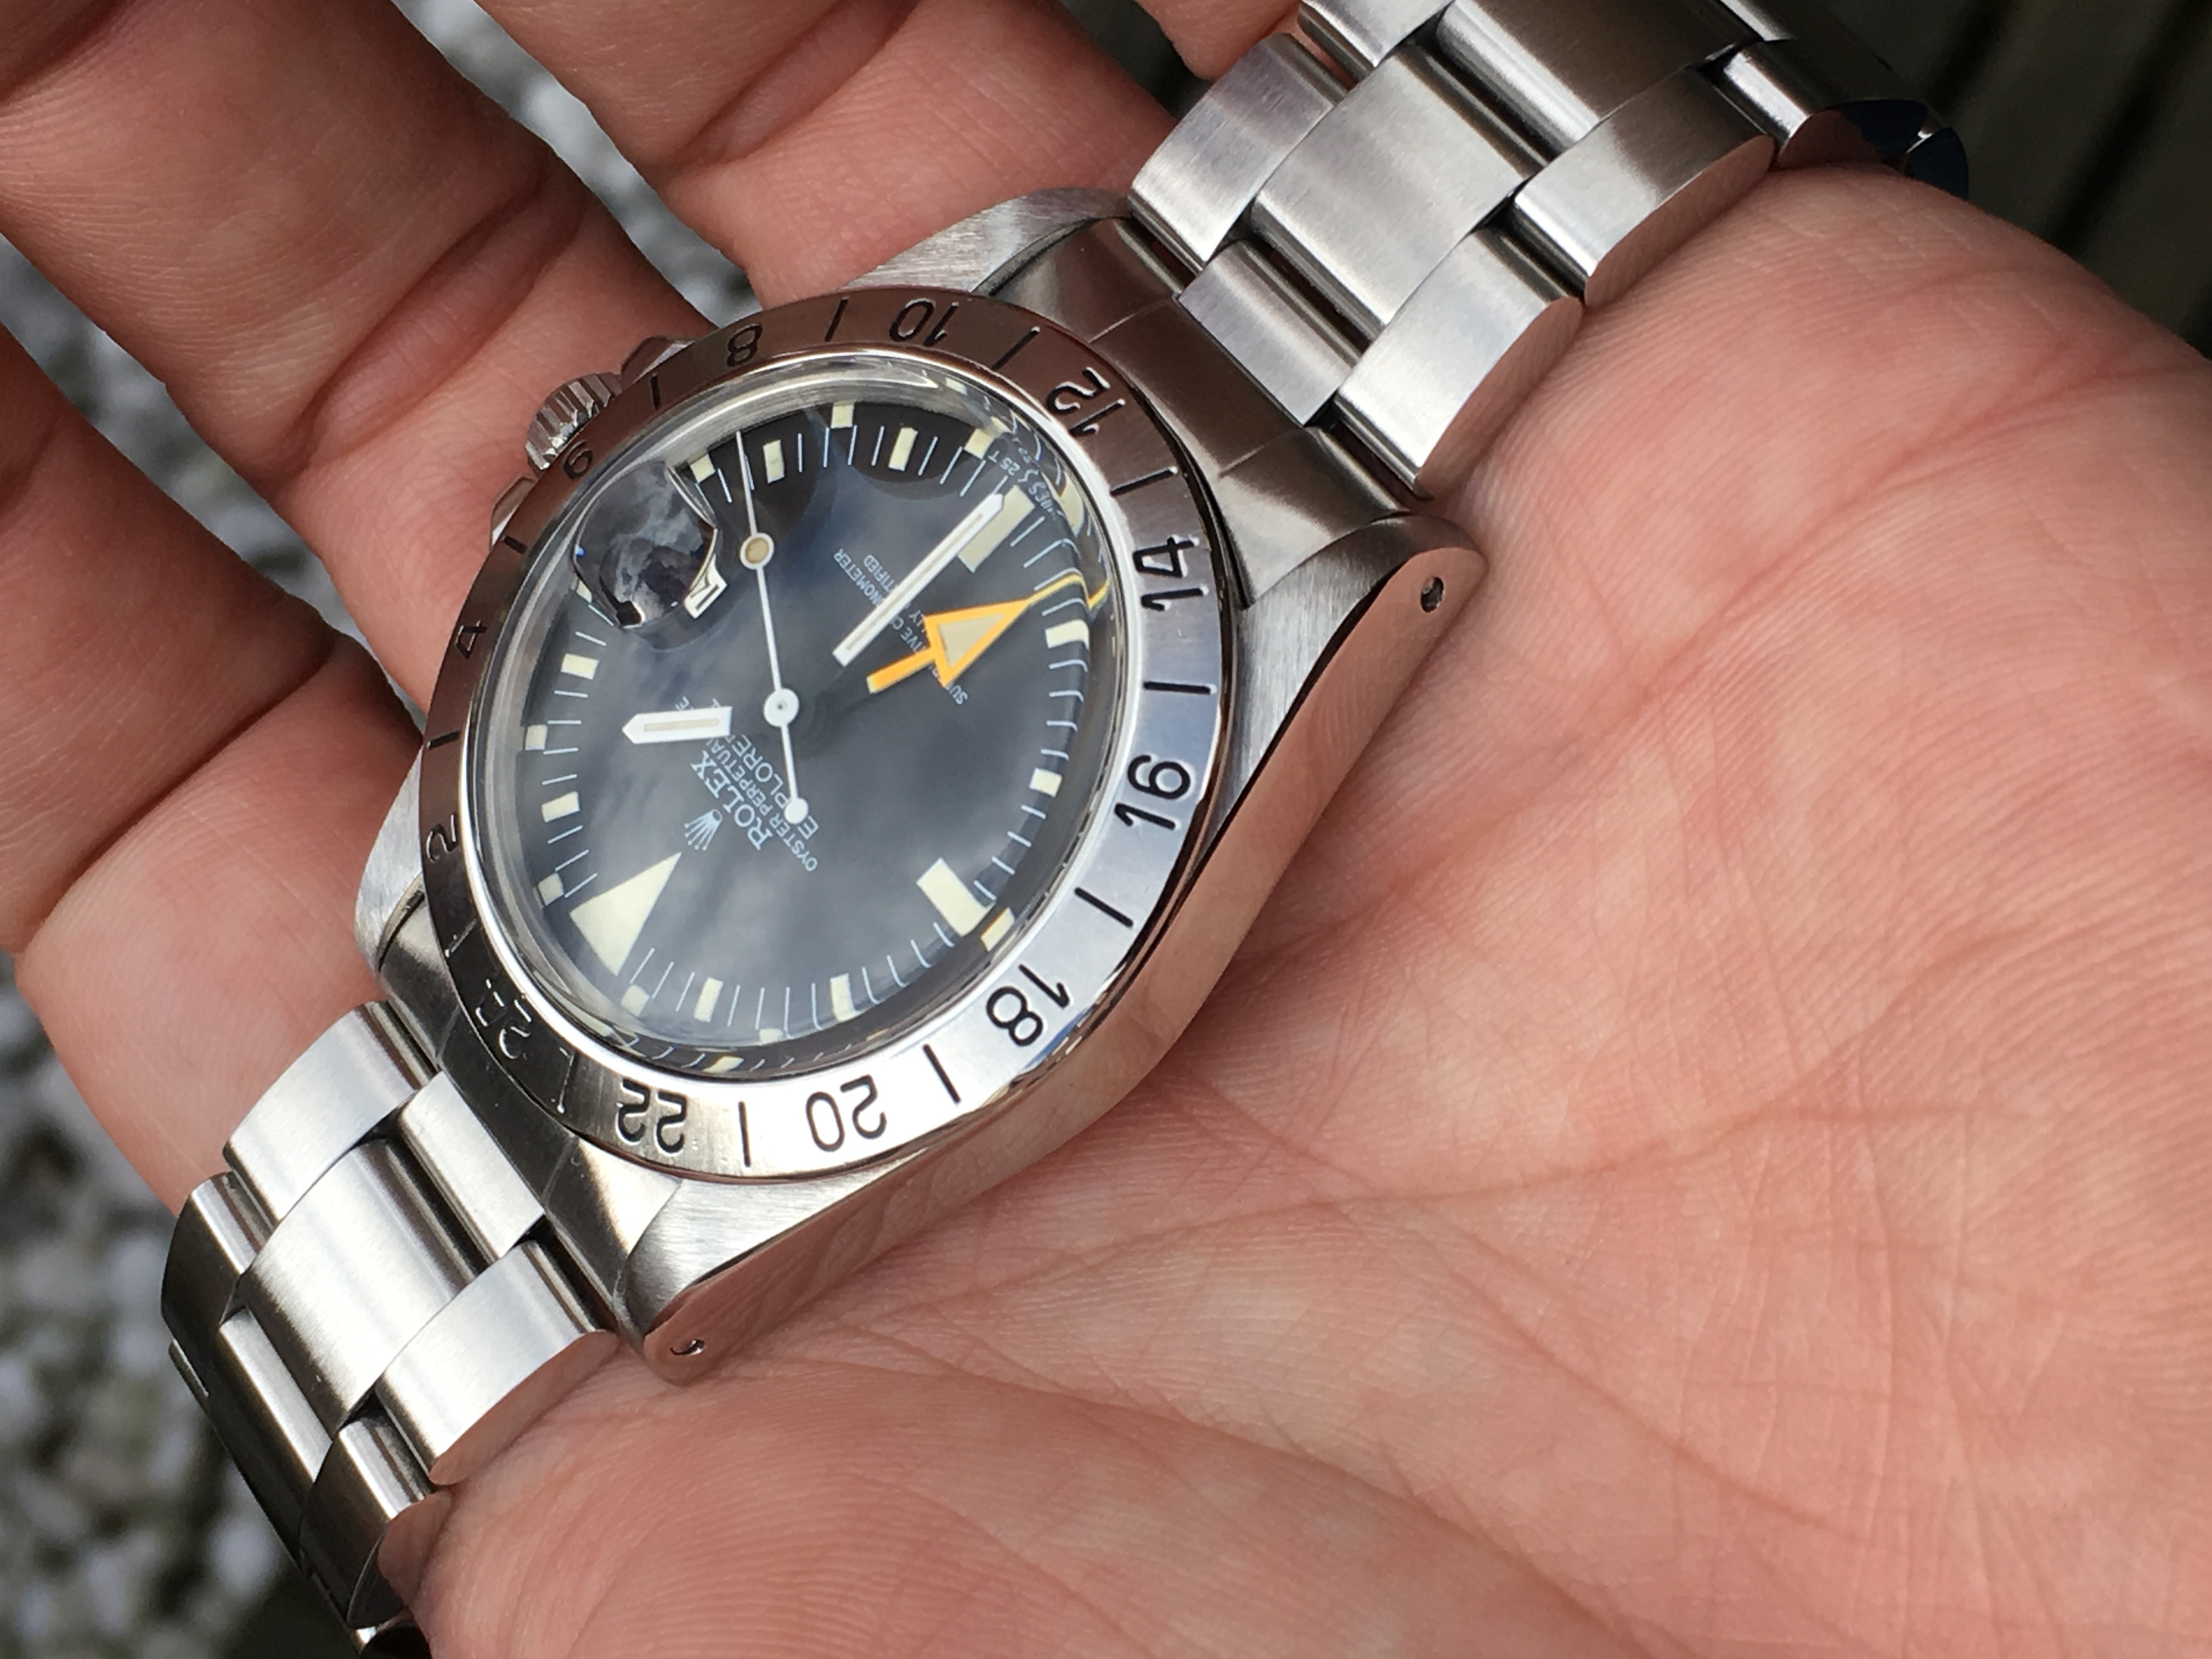 Rolex 1655 Explorer for sale @ Vintage Times Amsterdam - We Sell high ...